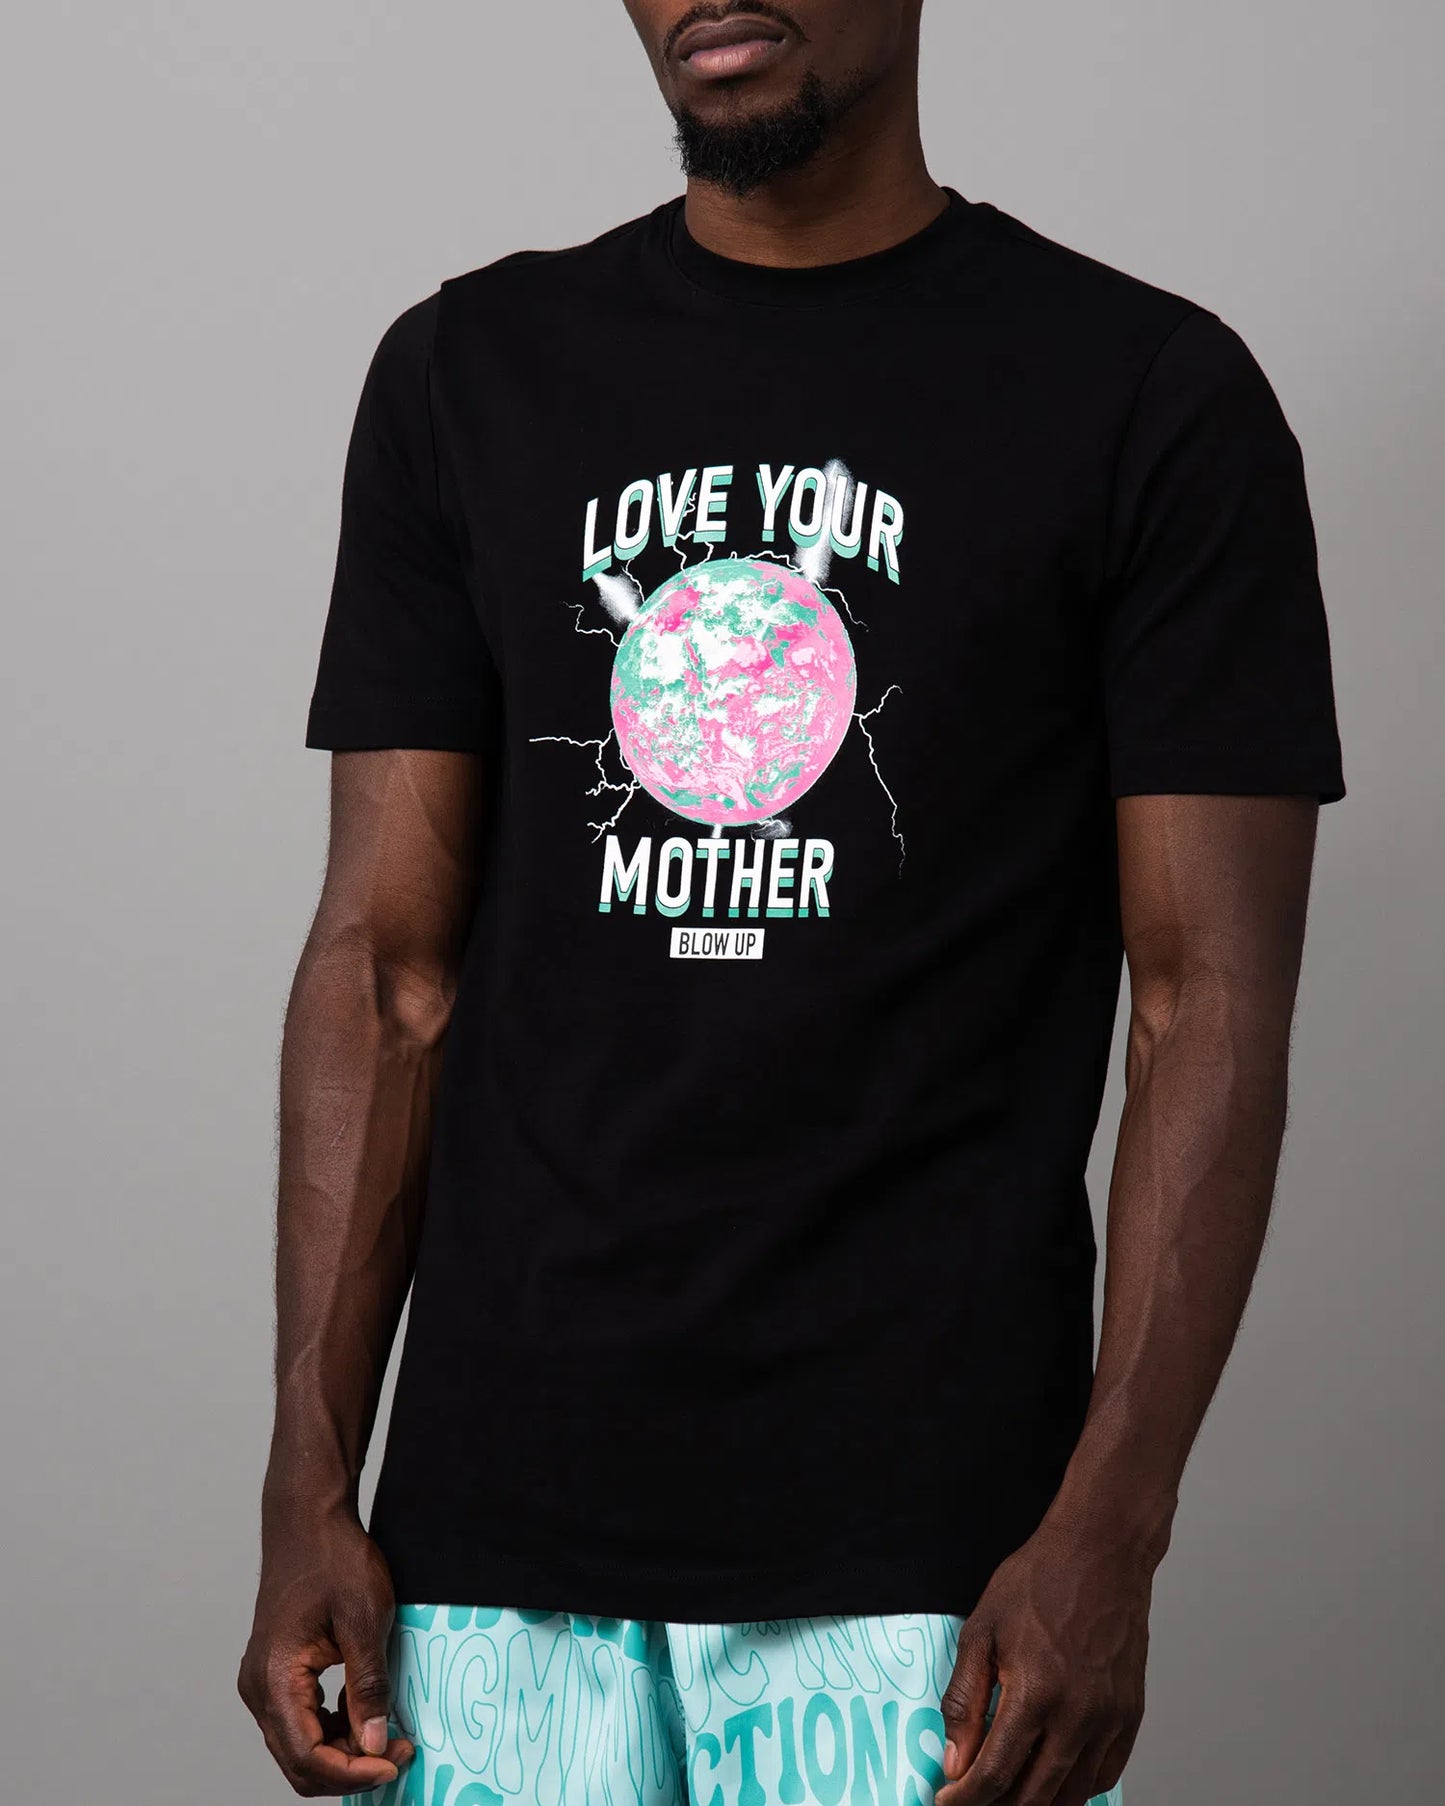 PRINTED LOVE YOUR MOTHER BLACK T SHIRT